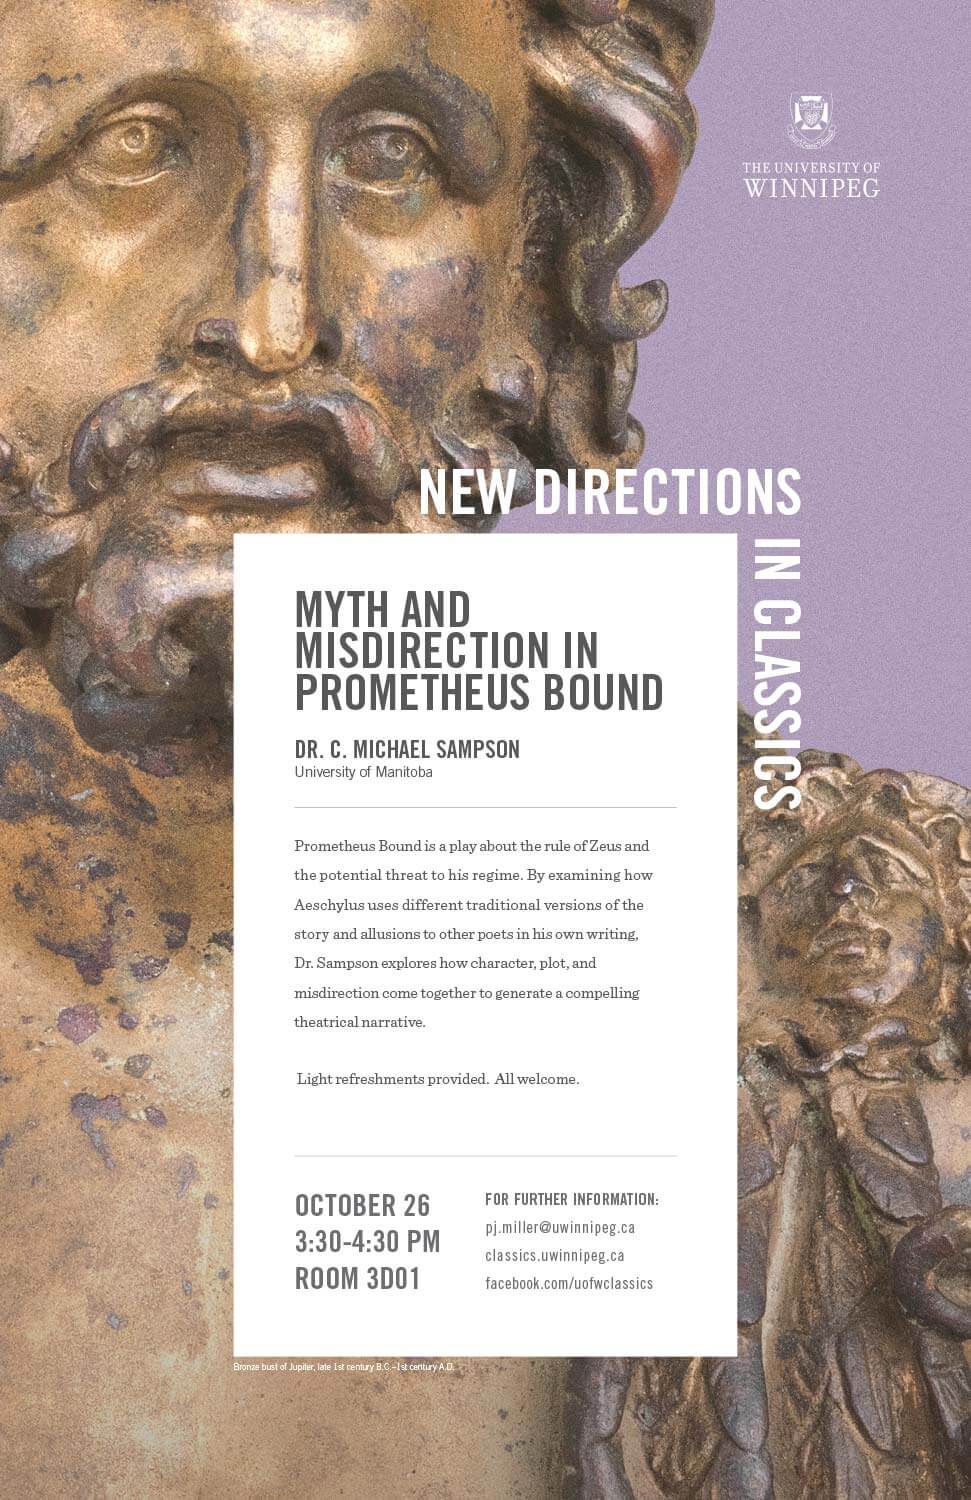 Promotional poster for Dr. C. Michael Sampson's New Directions in Classics Lecture, Oct 26, 2018 (text on web page)